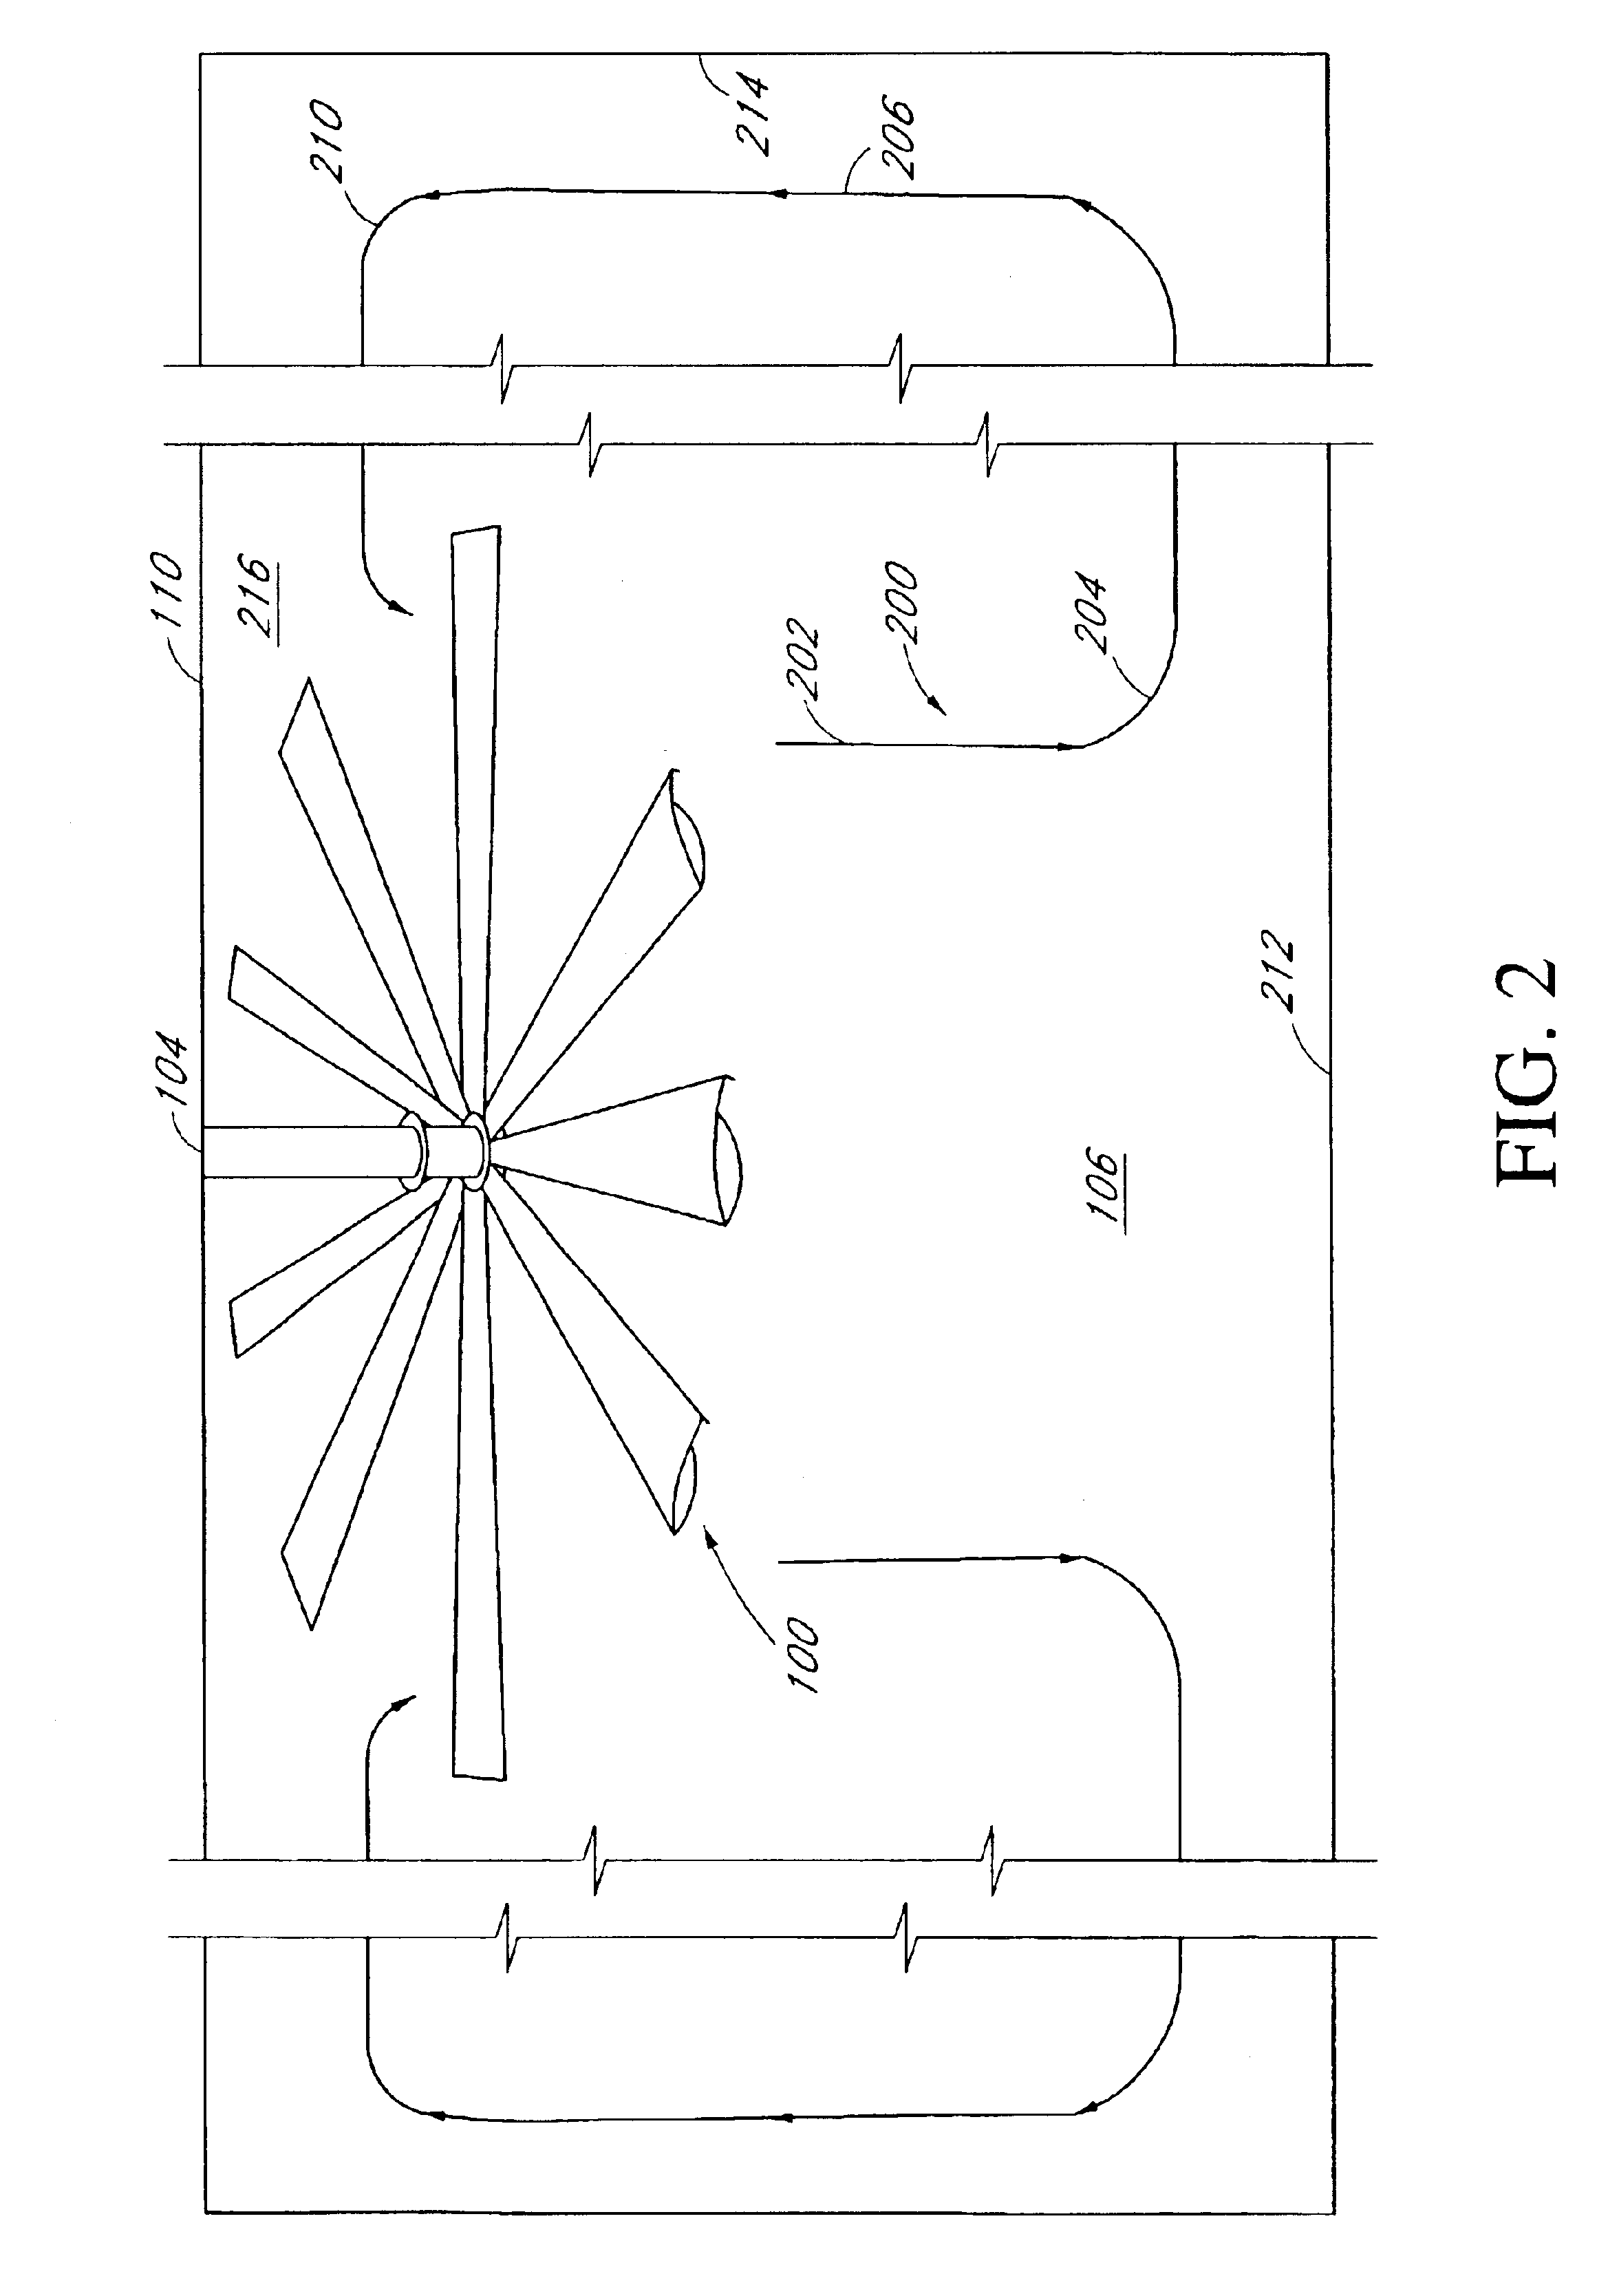 Cooling fan with reinforced blade